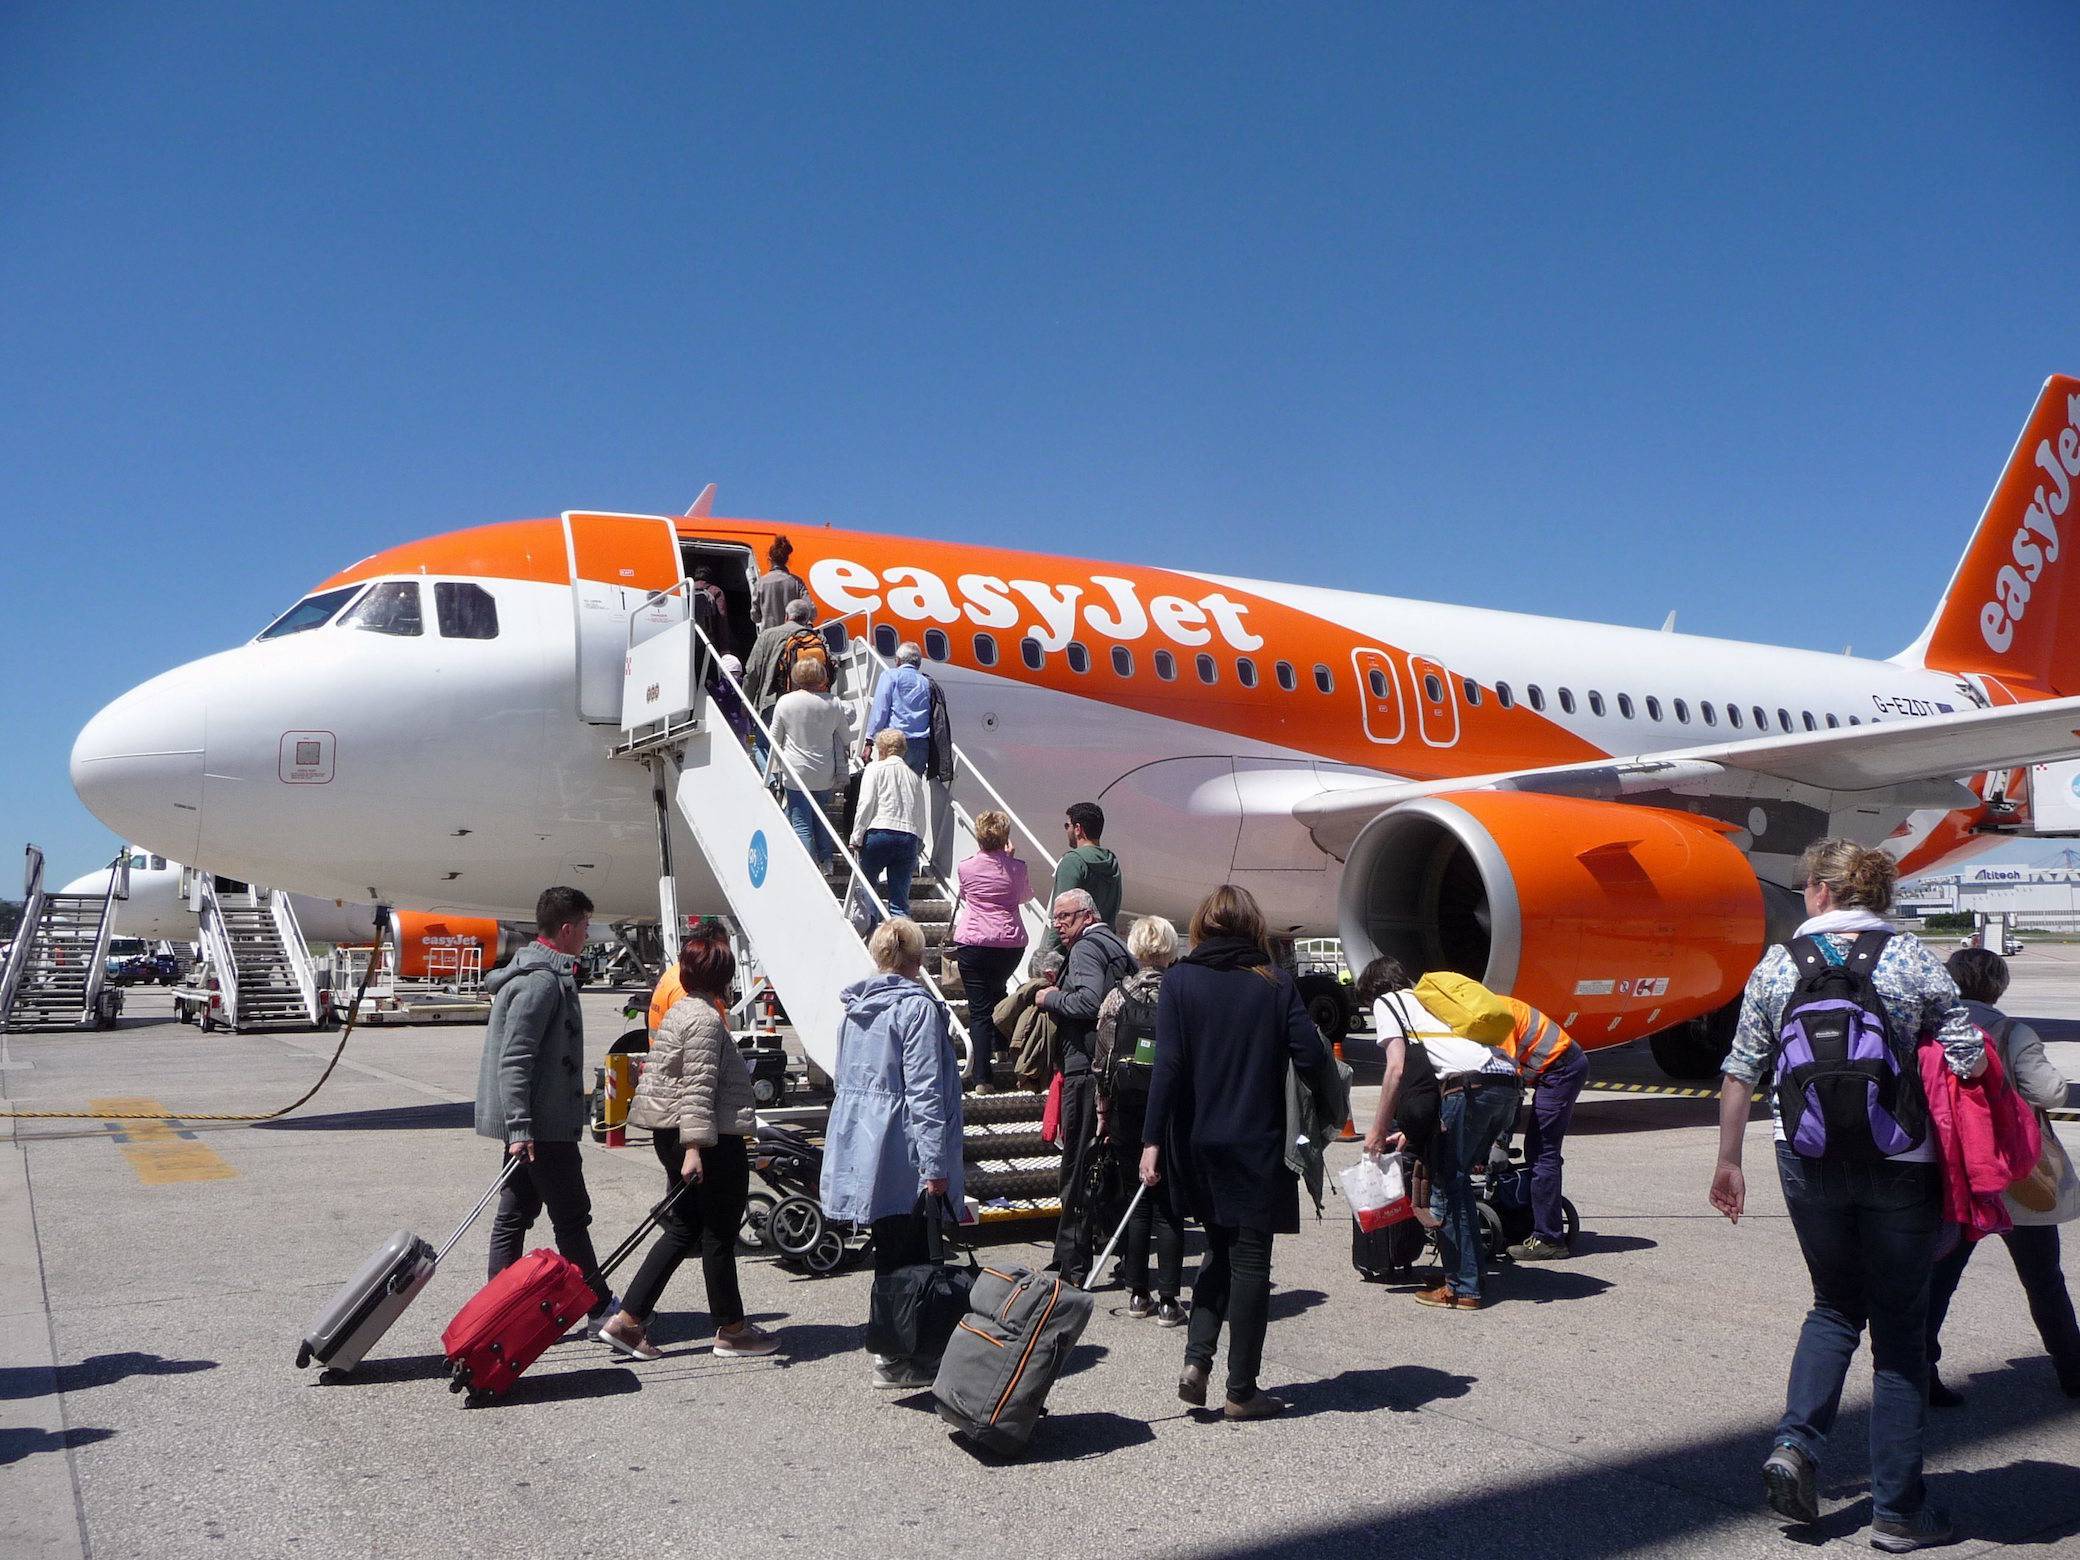 Easyjet | book our flights online & save | low-fares, offers & more